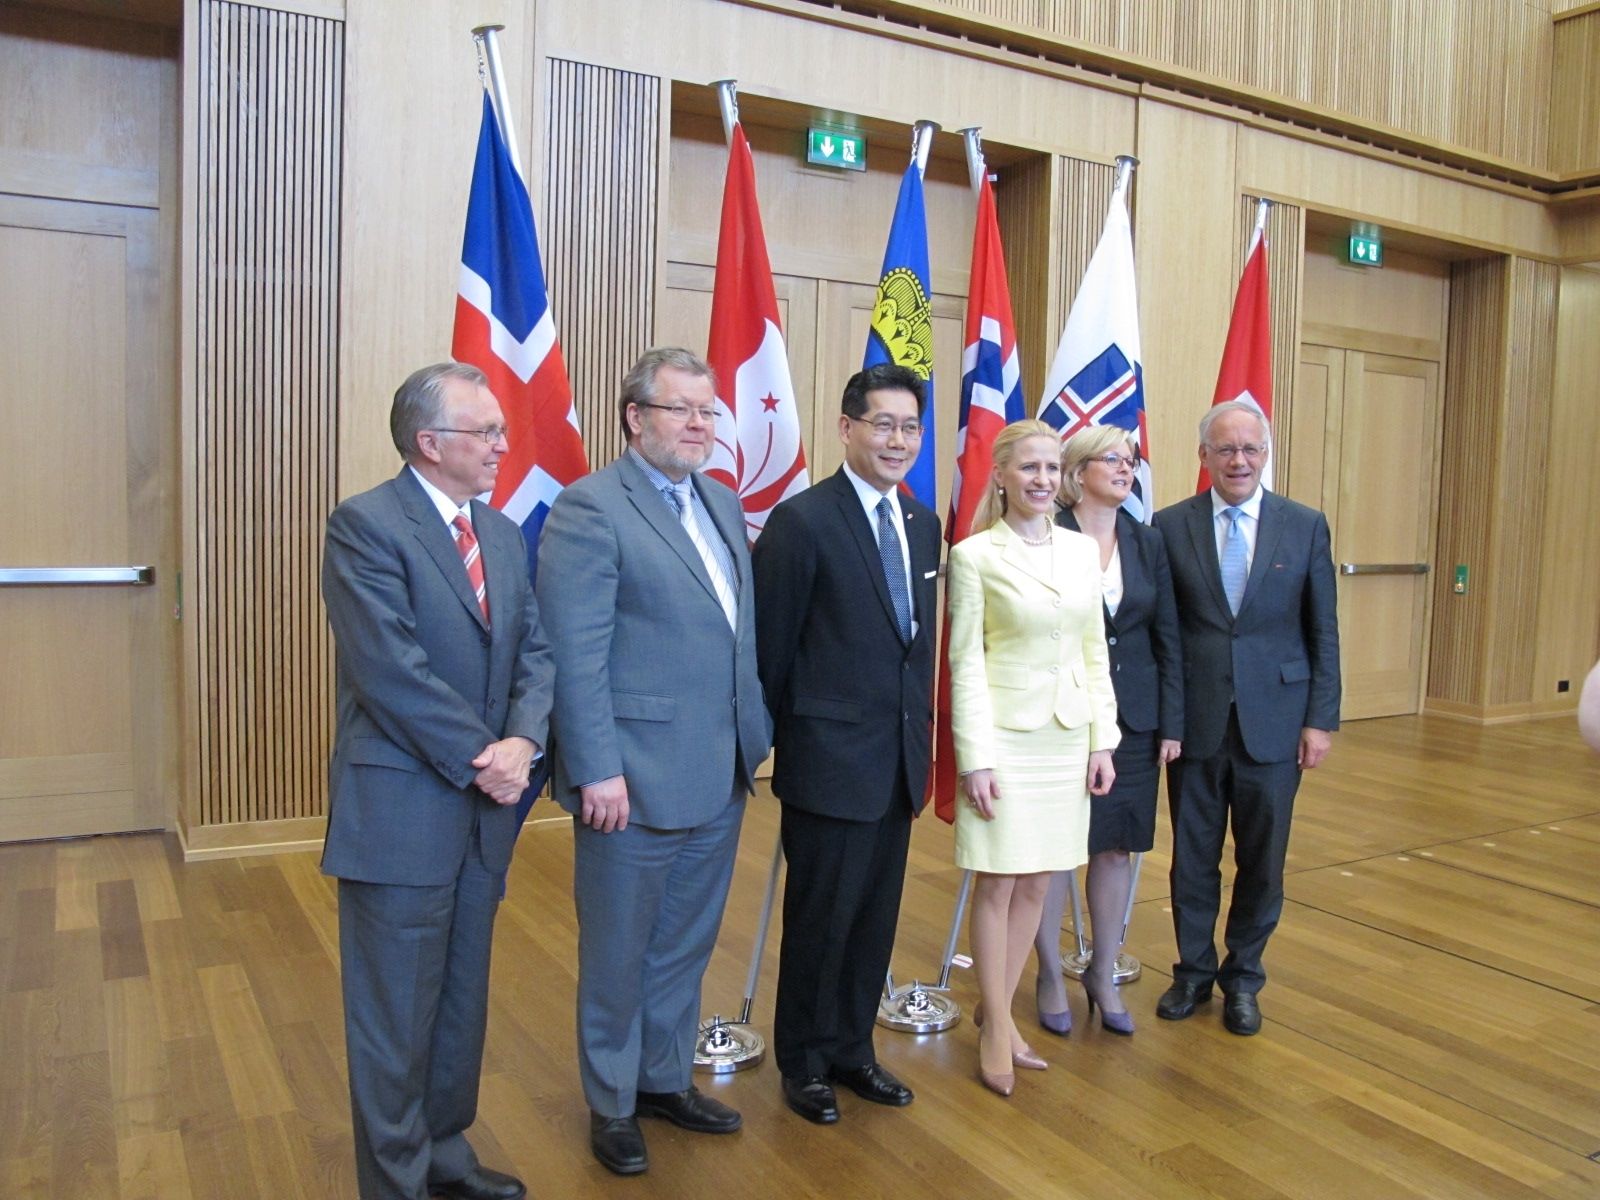 Group photo of Mr So and other signatories, including Minister for Foreign Affairs and External Trade of Iceland, Mr Ossur Skarphedinsson (second left); Minister of Foreign Affairs of Liechtenstein, Dr Aurelia Frick (third right); State Secretary of the Ministry of Trade and Industry of Norway, Ms Rikke Lind (second right); and Federal Councillor and Head of the Federal Department of Economic Affairs of Switzerland, Mr Johann N Schneider-Ammann (right). 